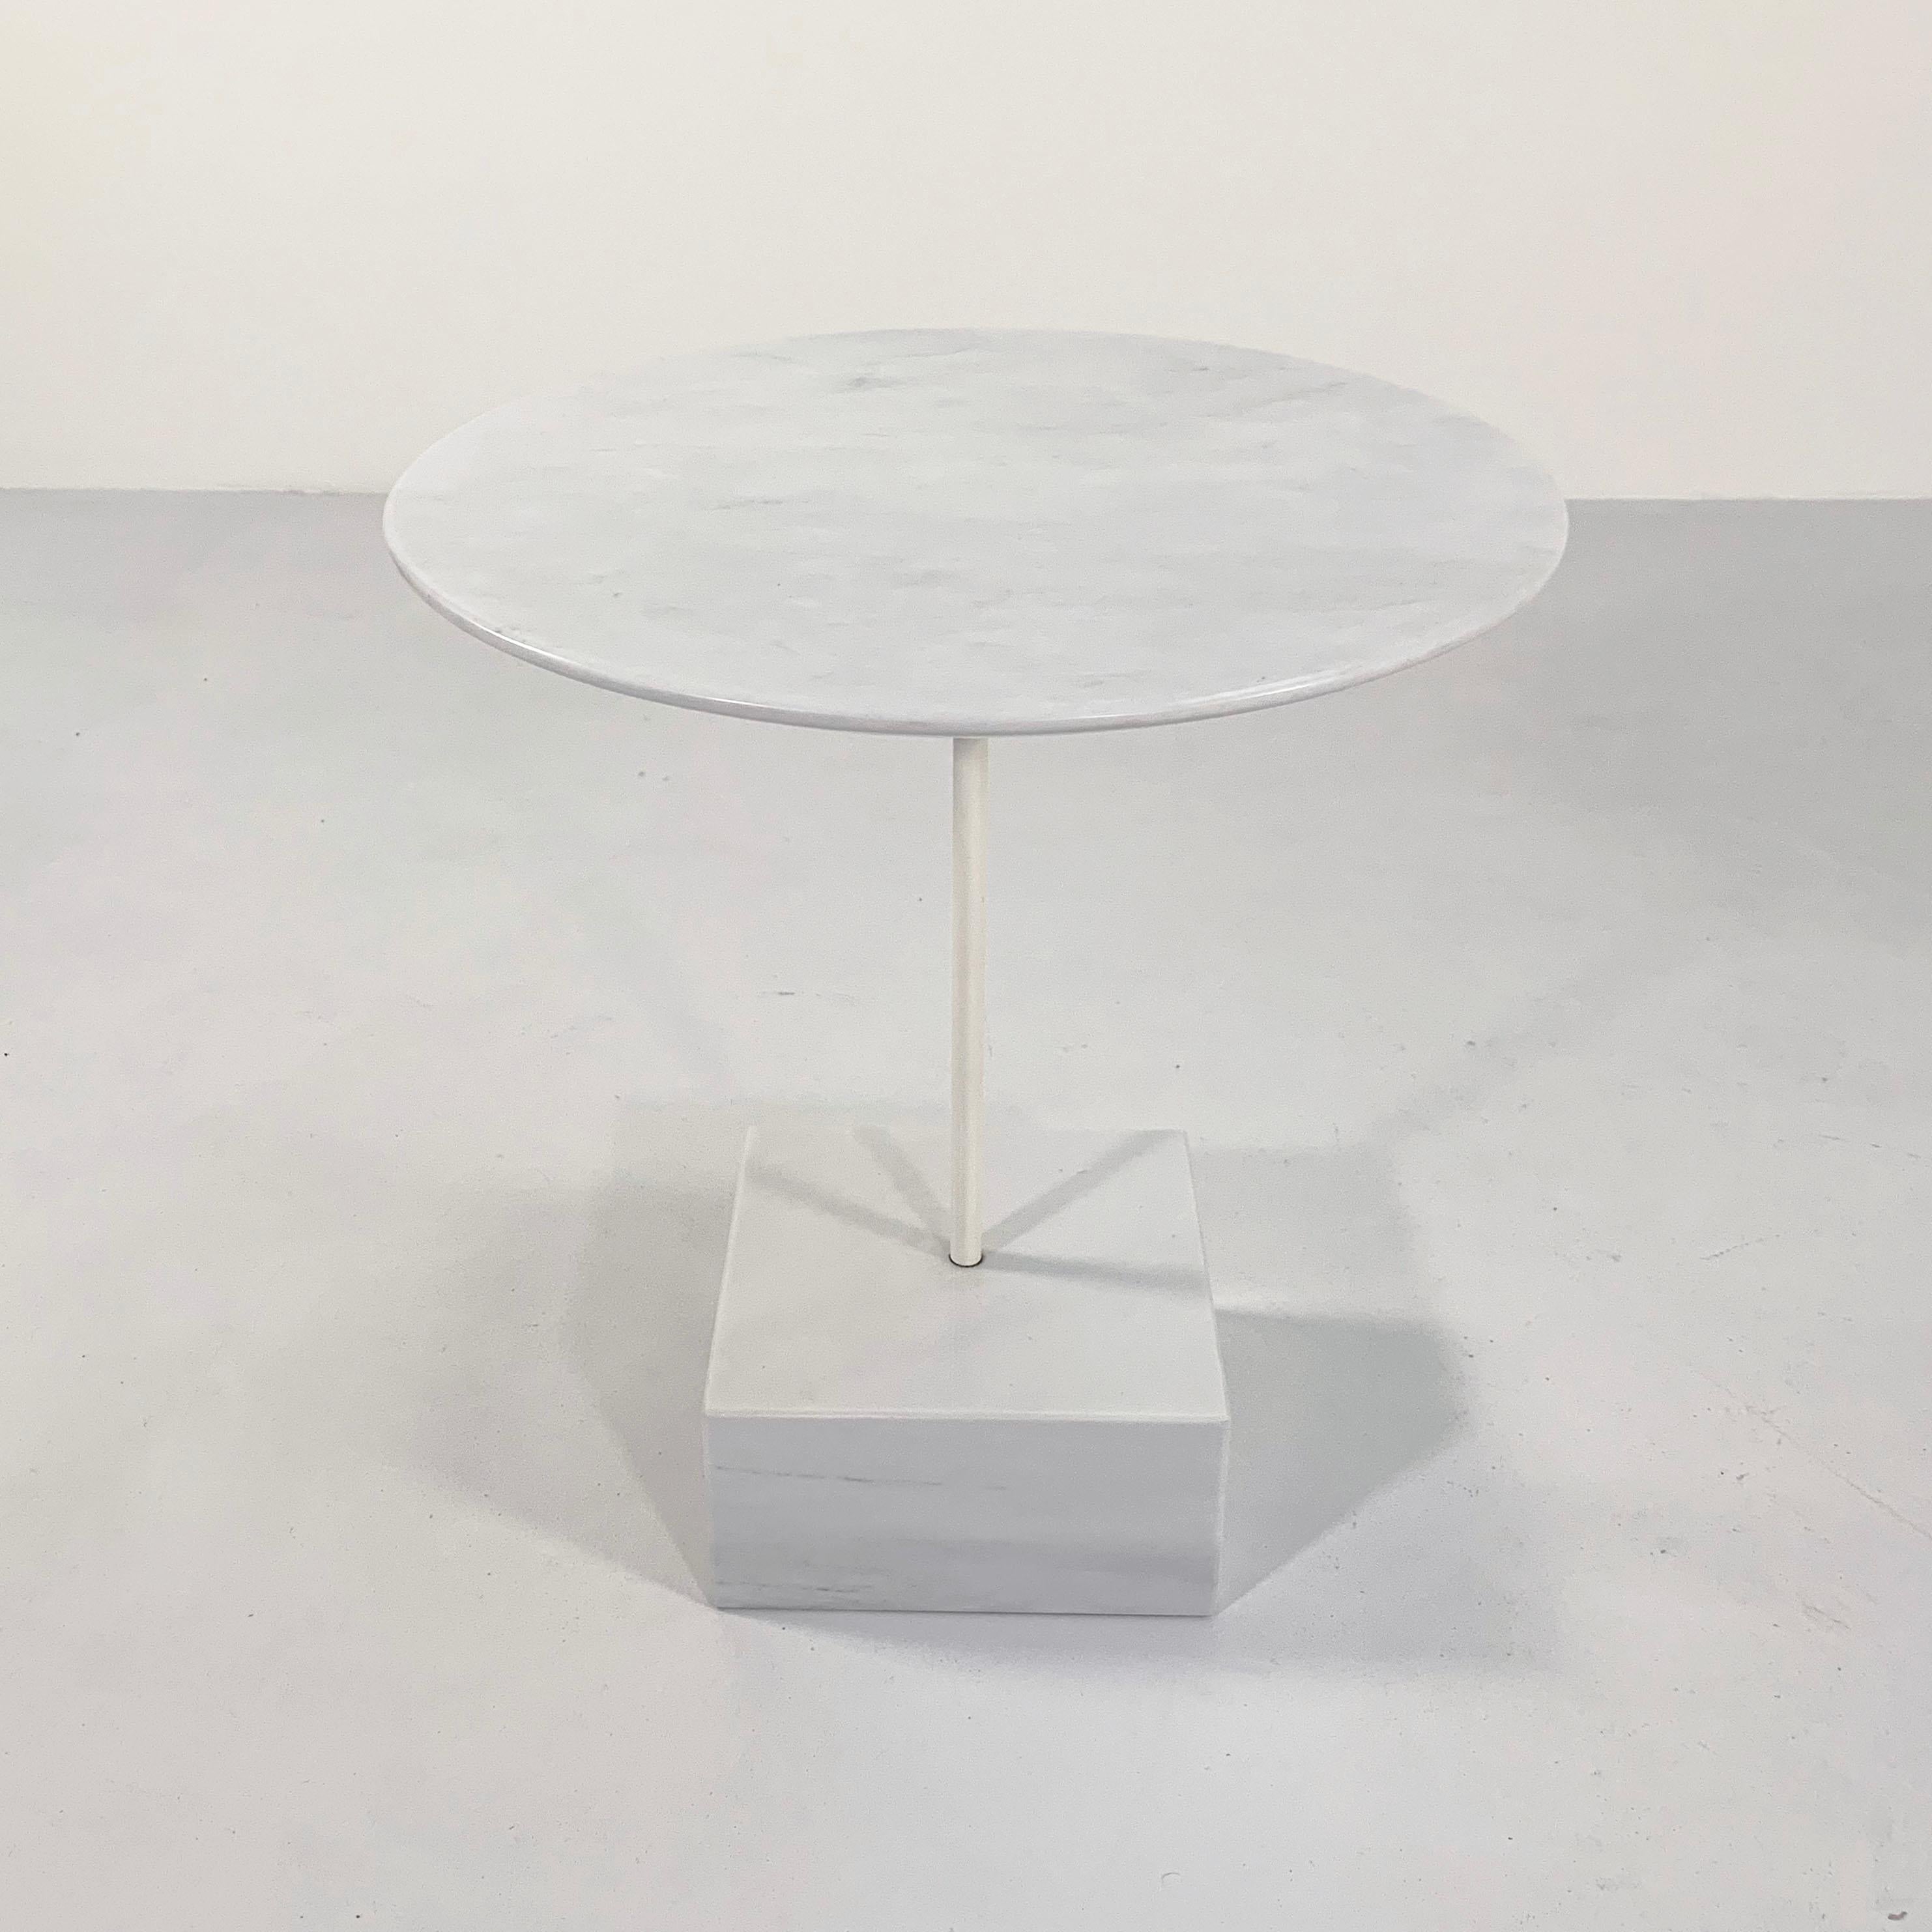 Primavera Side Table by Ettore Sottsass for Ultima Edizione, 1980s
Designer - Ettore Sottsass
Producer - Ultima Edizione
Model - Primavera Side Table 
Design Period - Eighties 
Measurements - width 50 cm x depth 50 cm x height 54 cm
Materials